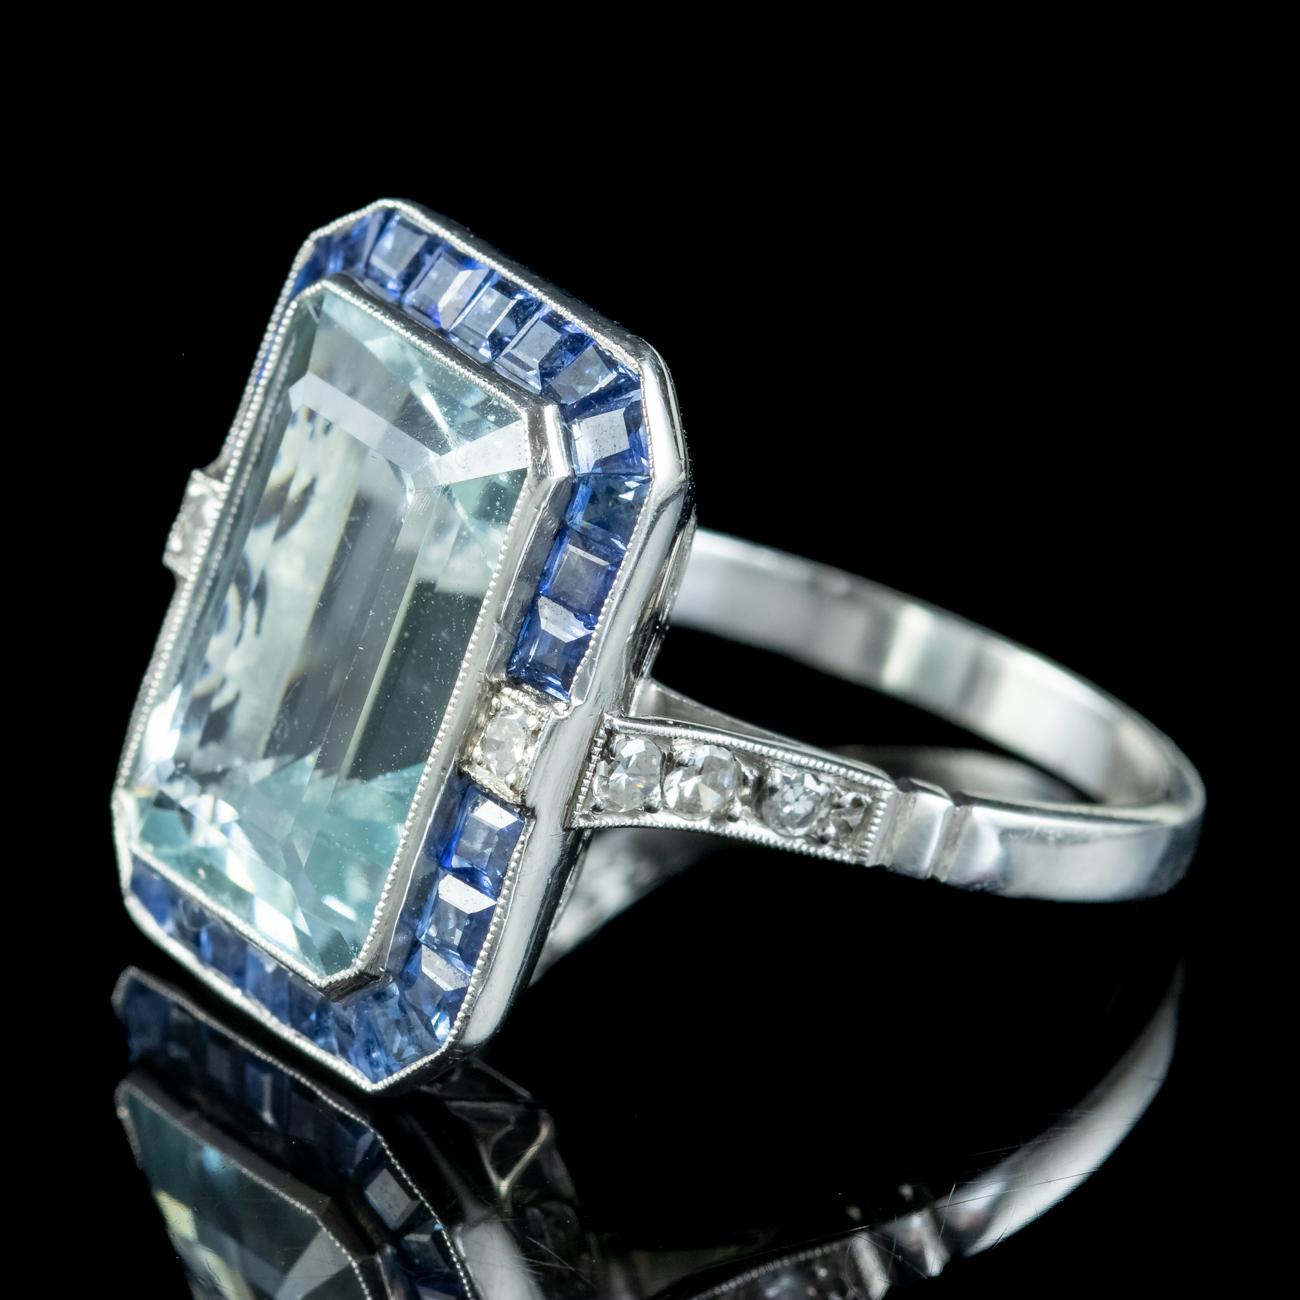 Art Deco Style Aquamarine Sapphire Diamond Cocktail Ring 7.29ct Aqua In Good Condition For Sale In Kendal, GB